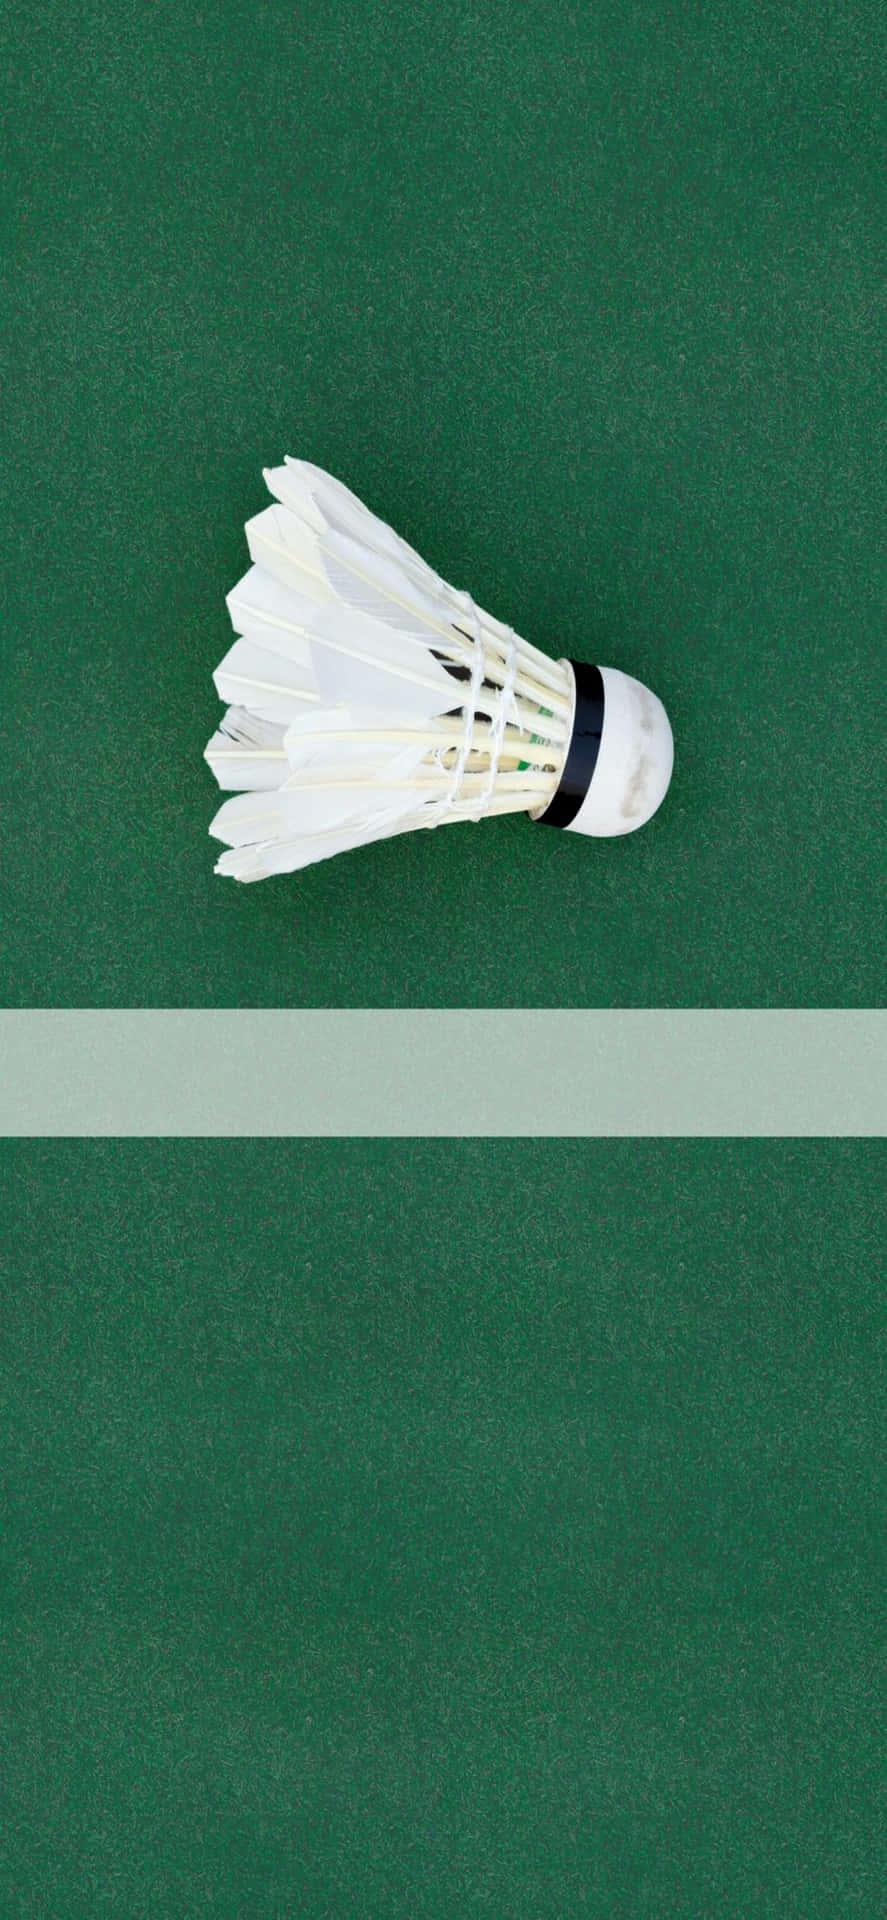 Take your badminton game to the next level with iPhone Xs Max